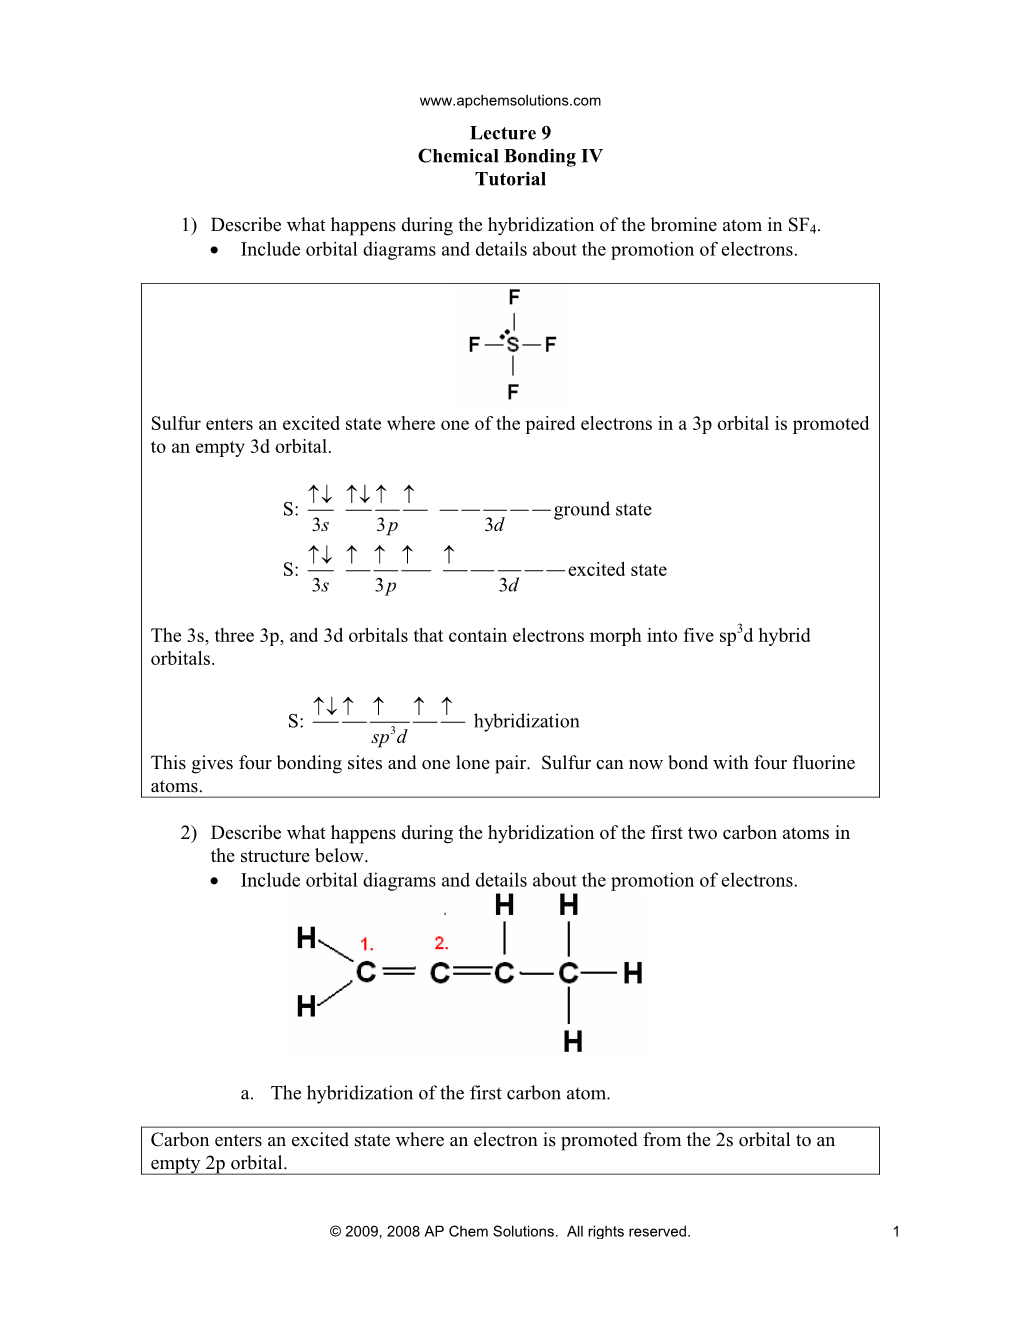 Lecture 9 Chemical Bonding IV Tutorial